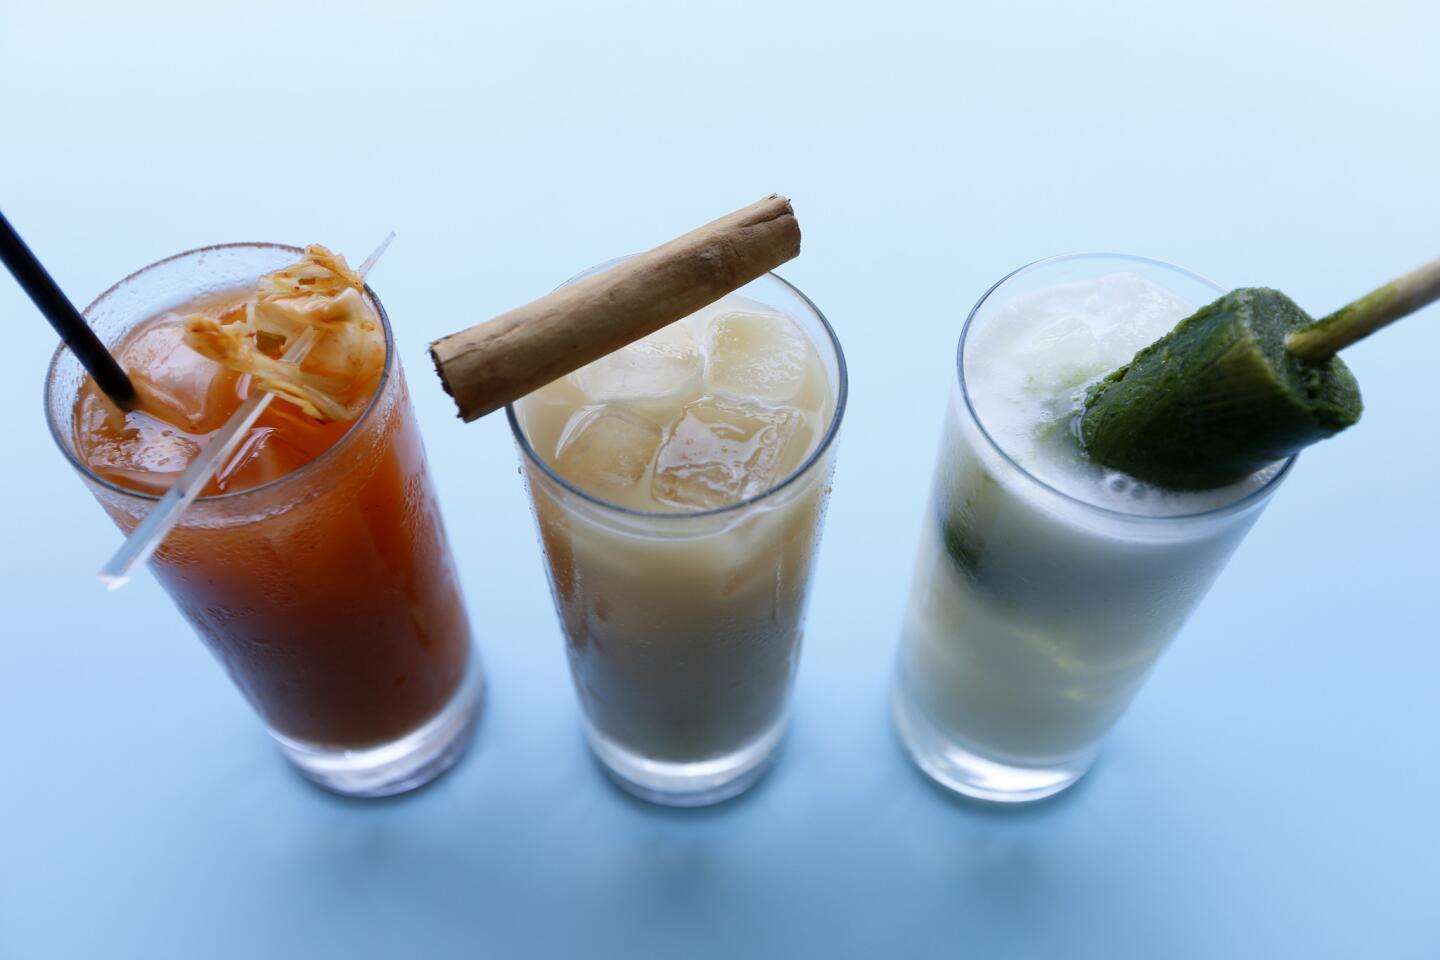 Kimchi Bloody Mary, left, horchata with rum & cold brew coffee with cinnamon, middle, Nasty Gal: Cachaca, cherimoya, coconut, nasturtium, right, at the Alma restaurant.